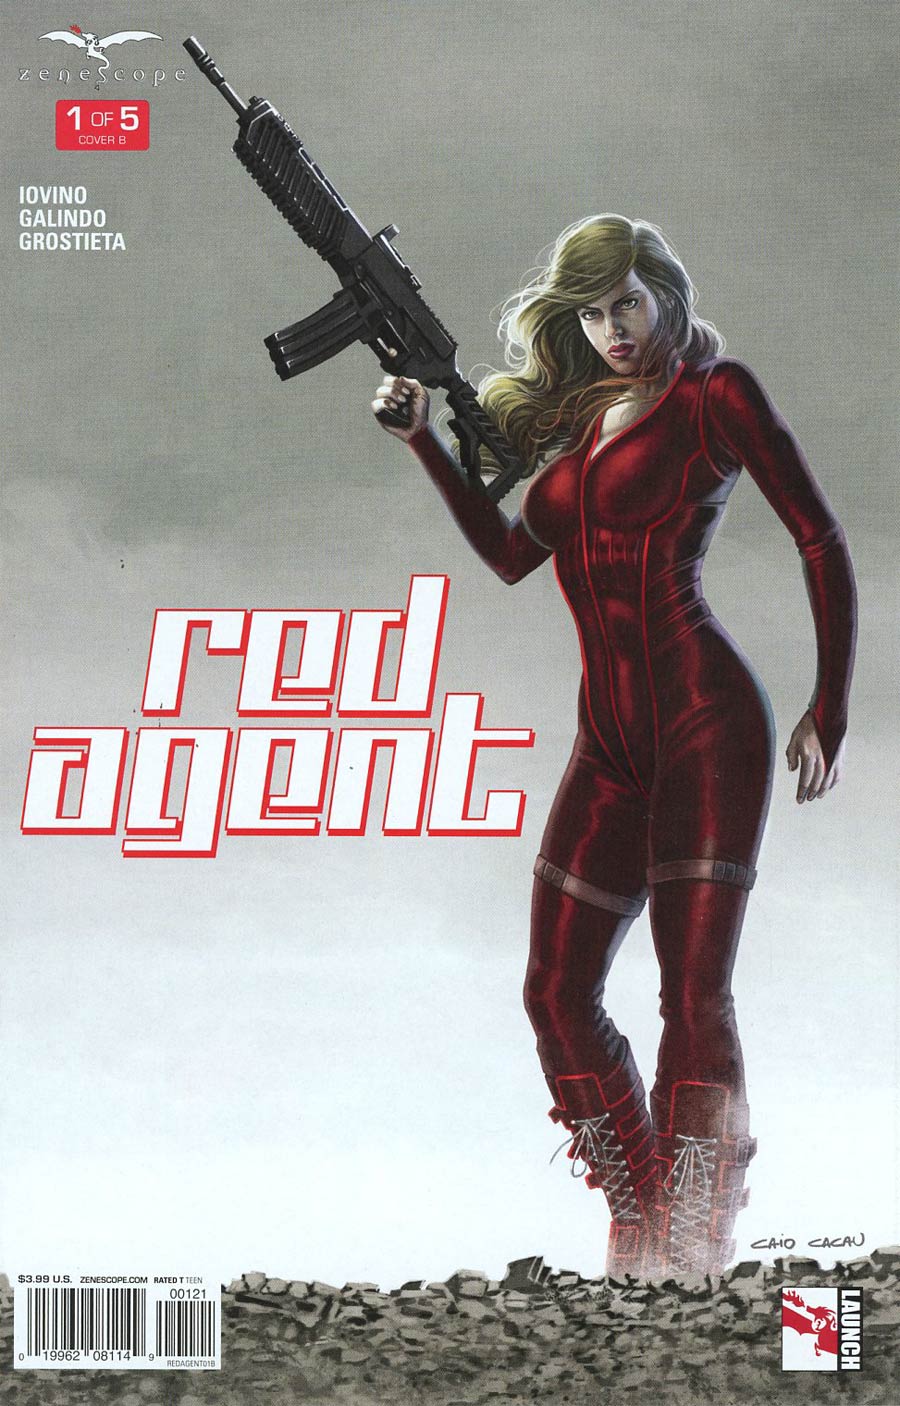 Grimm Fairy Tales Presents Red Agent #1 Cover B Caio Cacau